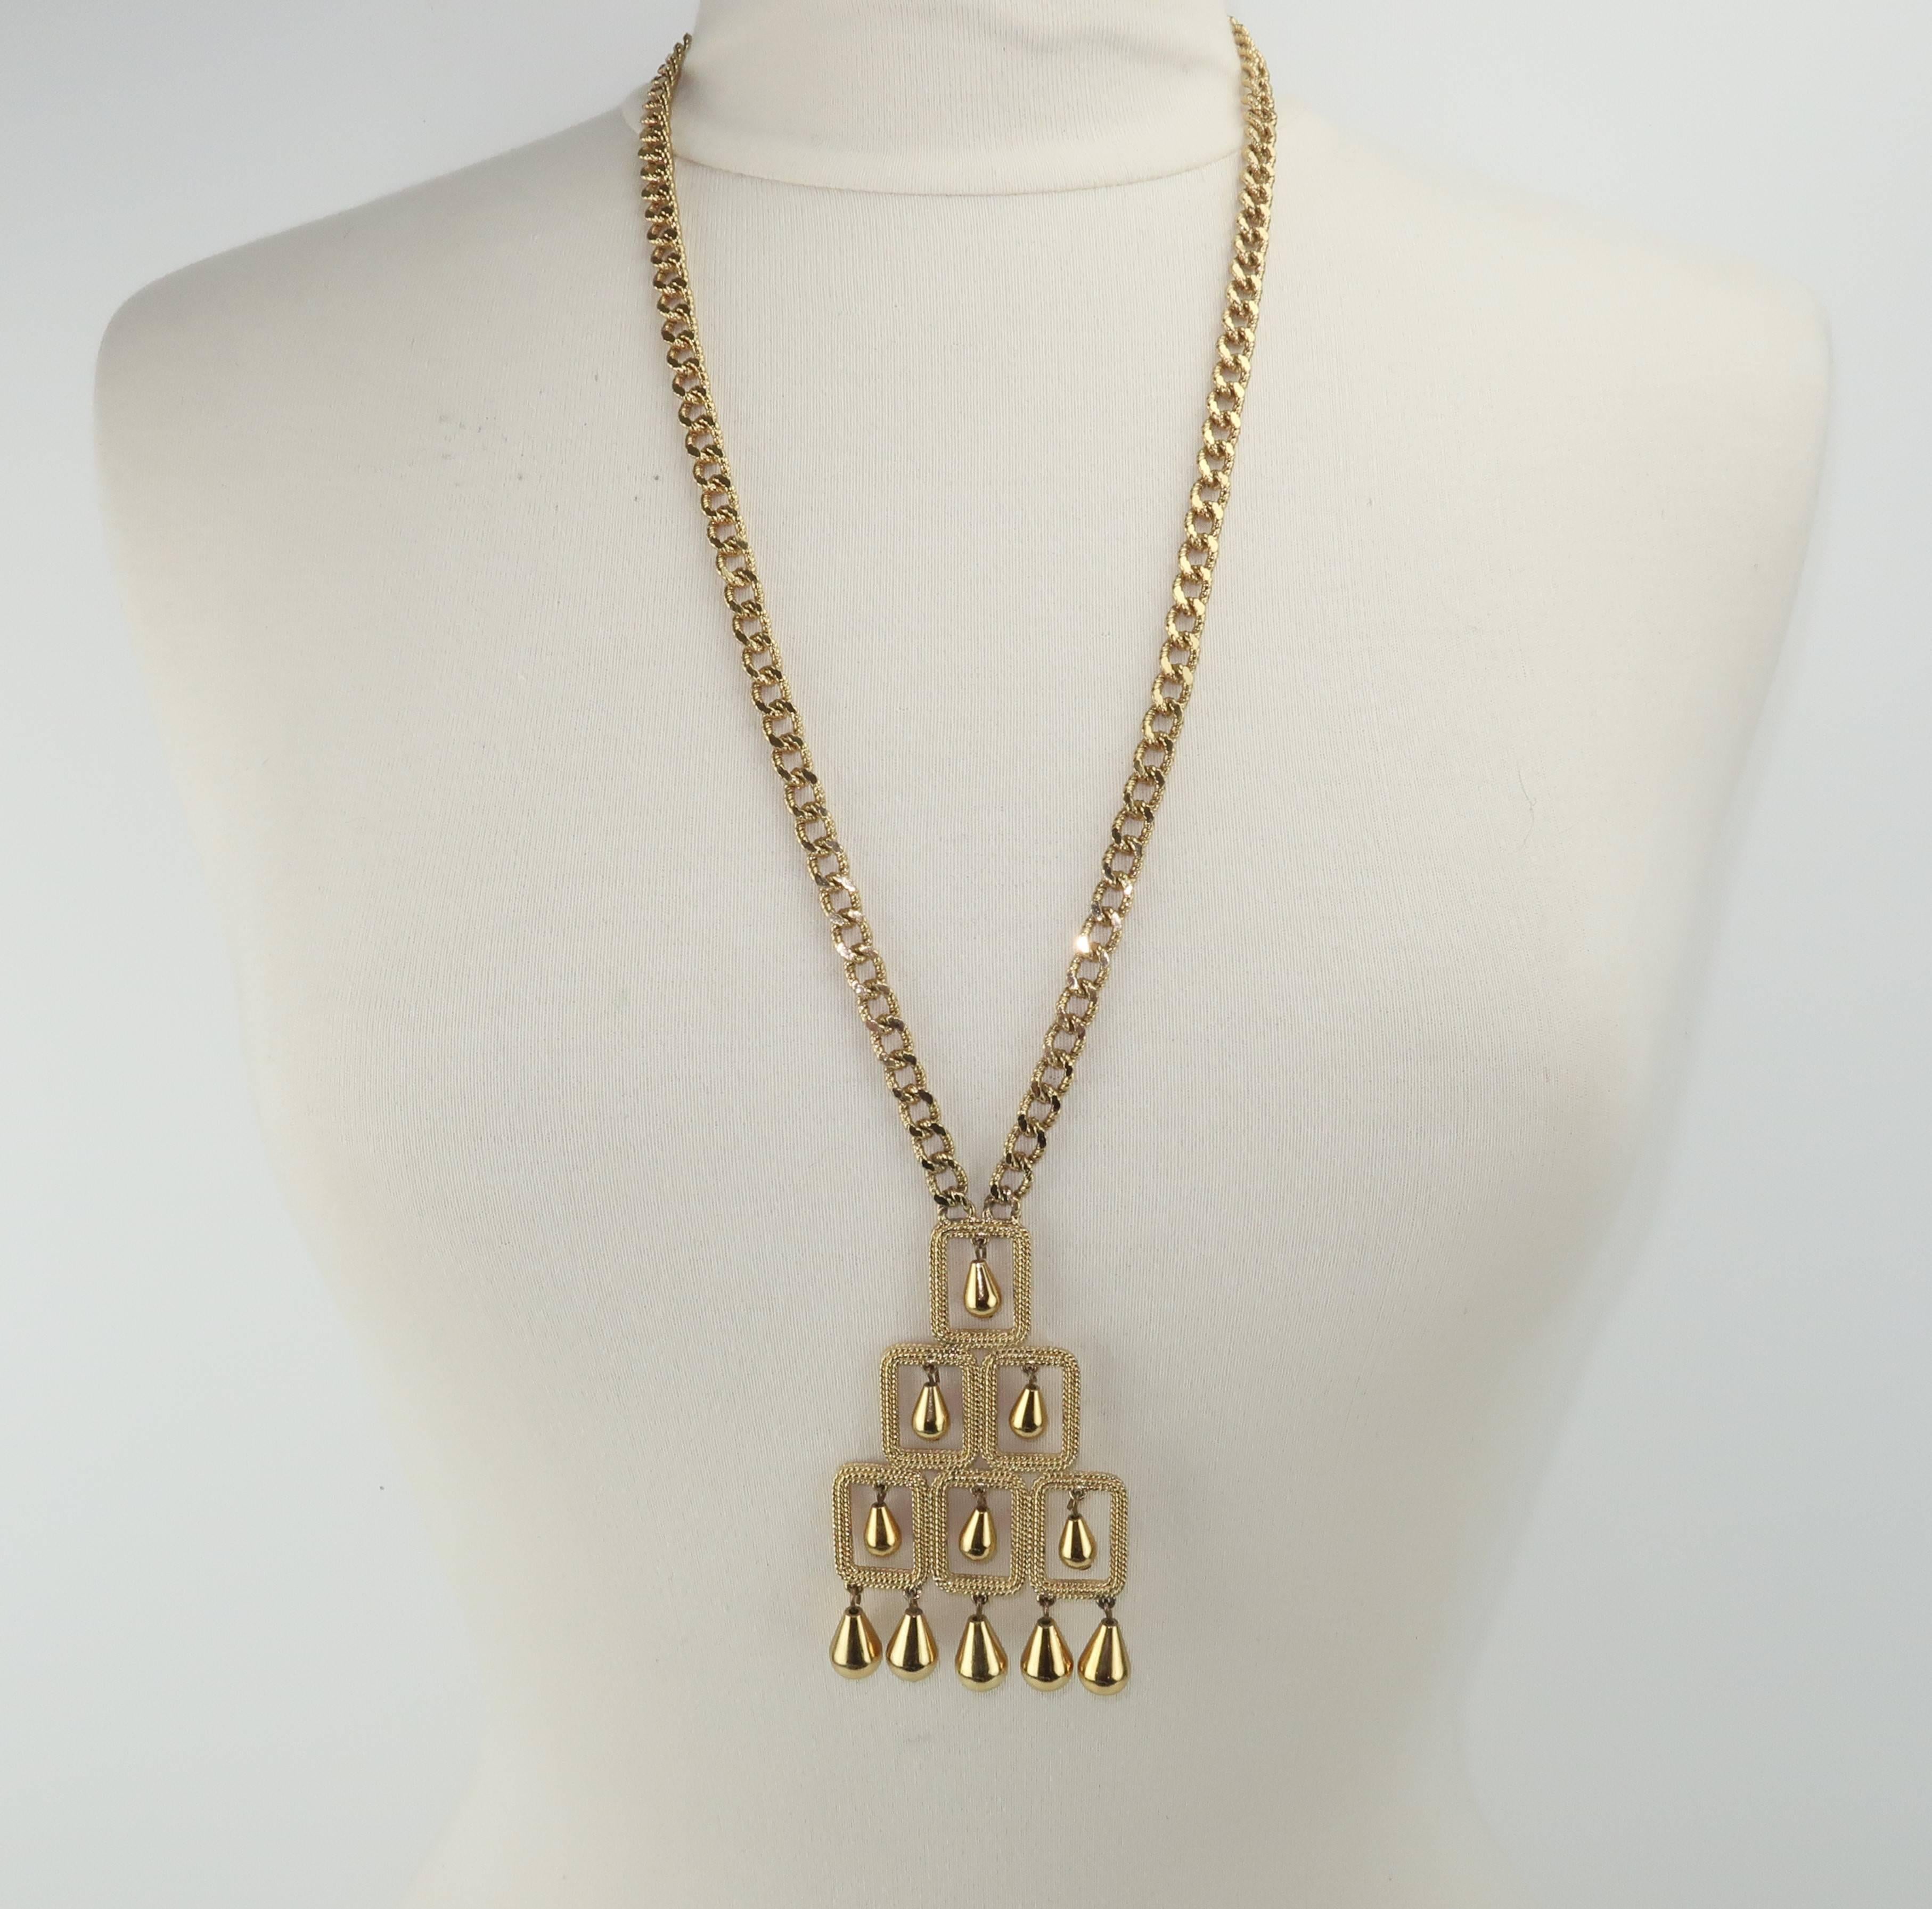 A fun statement necklace can be just the right accessory to add a dash of vintage to a modern ensemble.  This 1960’s gold tone necklace from Monet bears the quality of fine costume jewelry with a modernist design typical of the era.  The chunky link